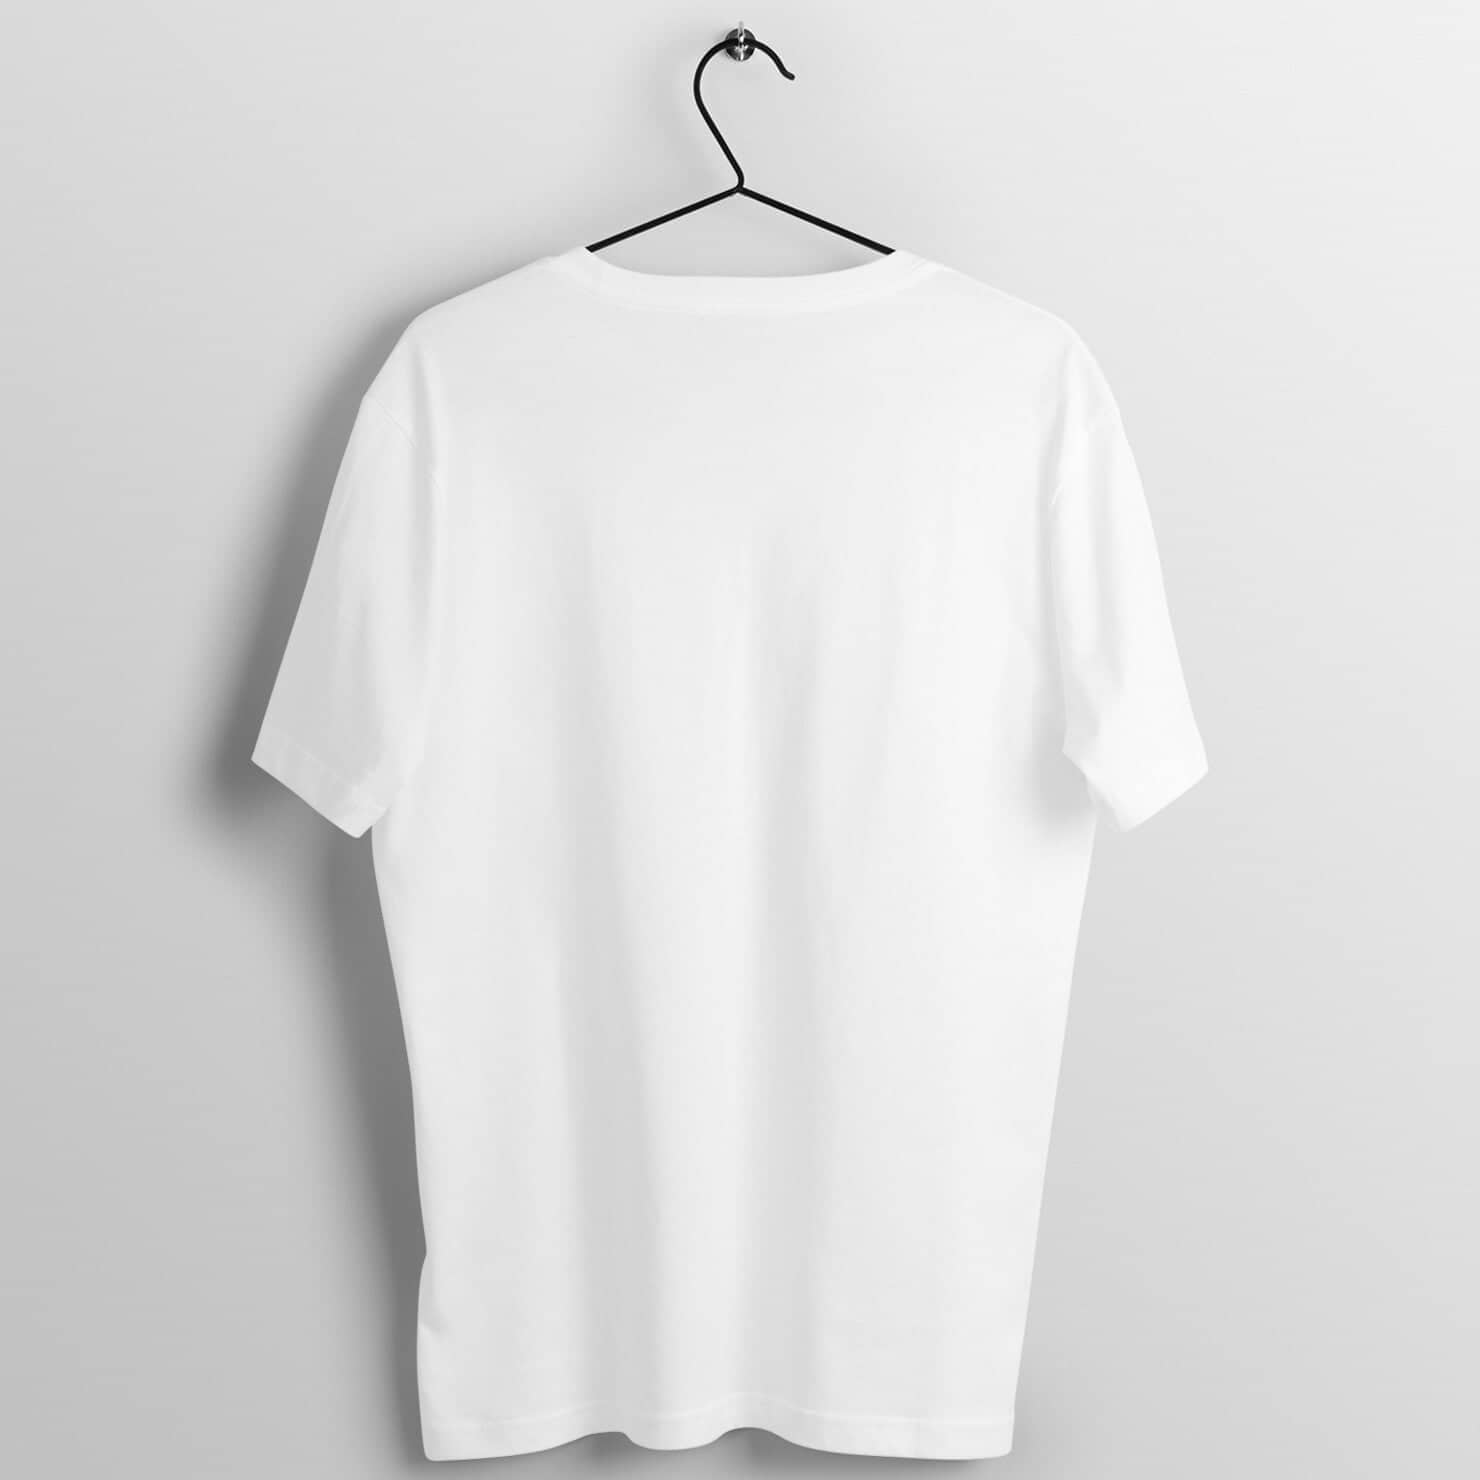 Powered By Plants Exclusive White T Shirt for Men and Women freeshipping - Catch My Drift India